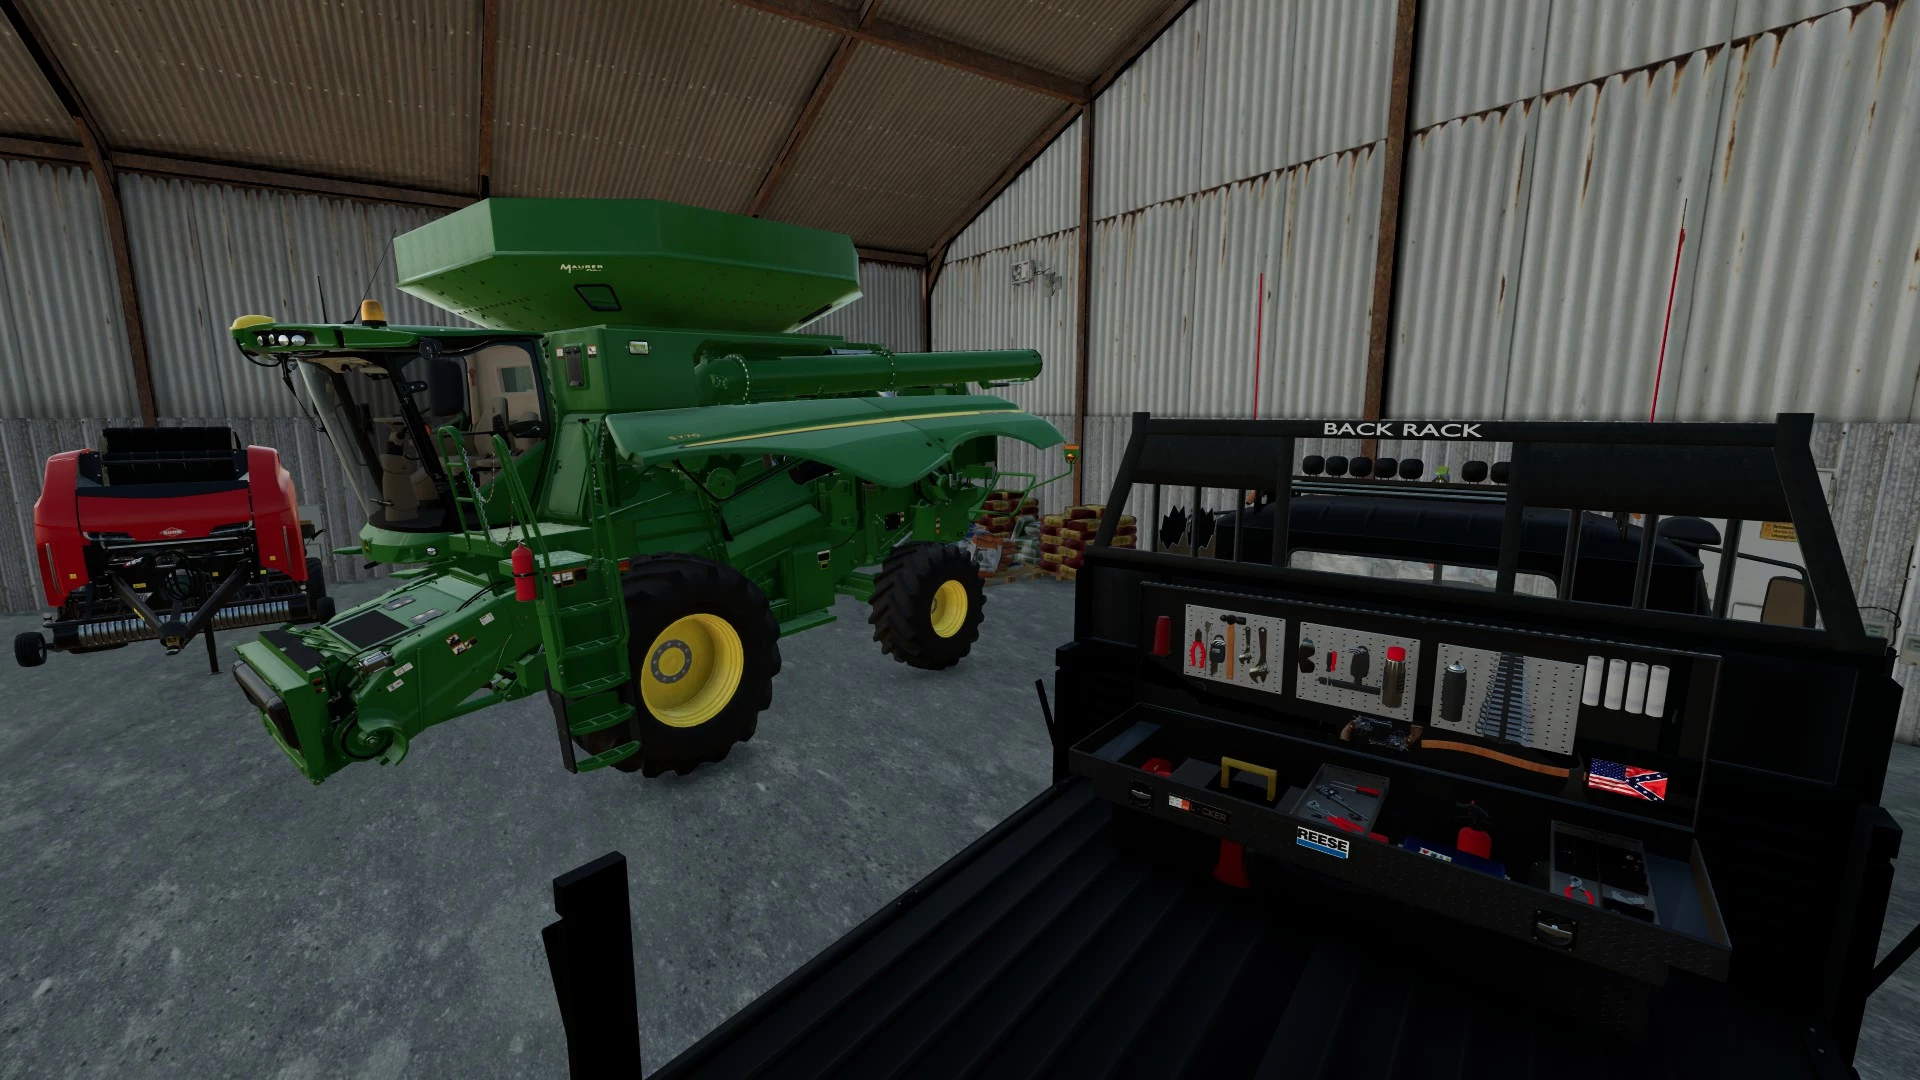 Time to service the combine